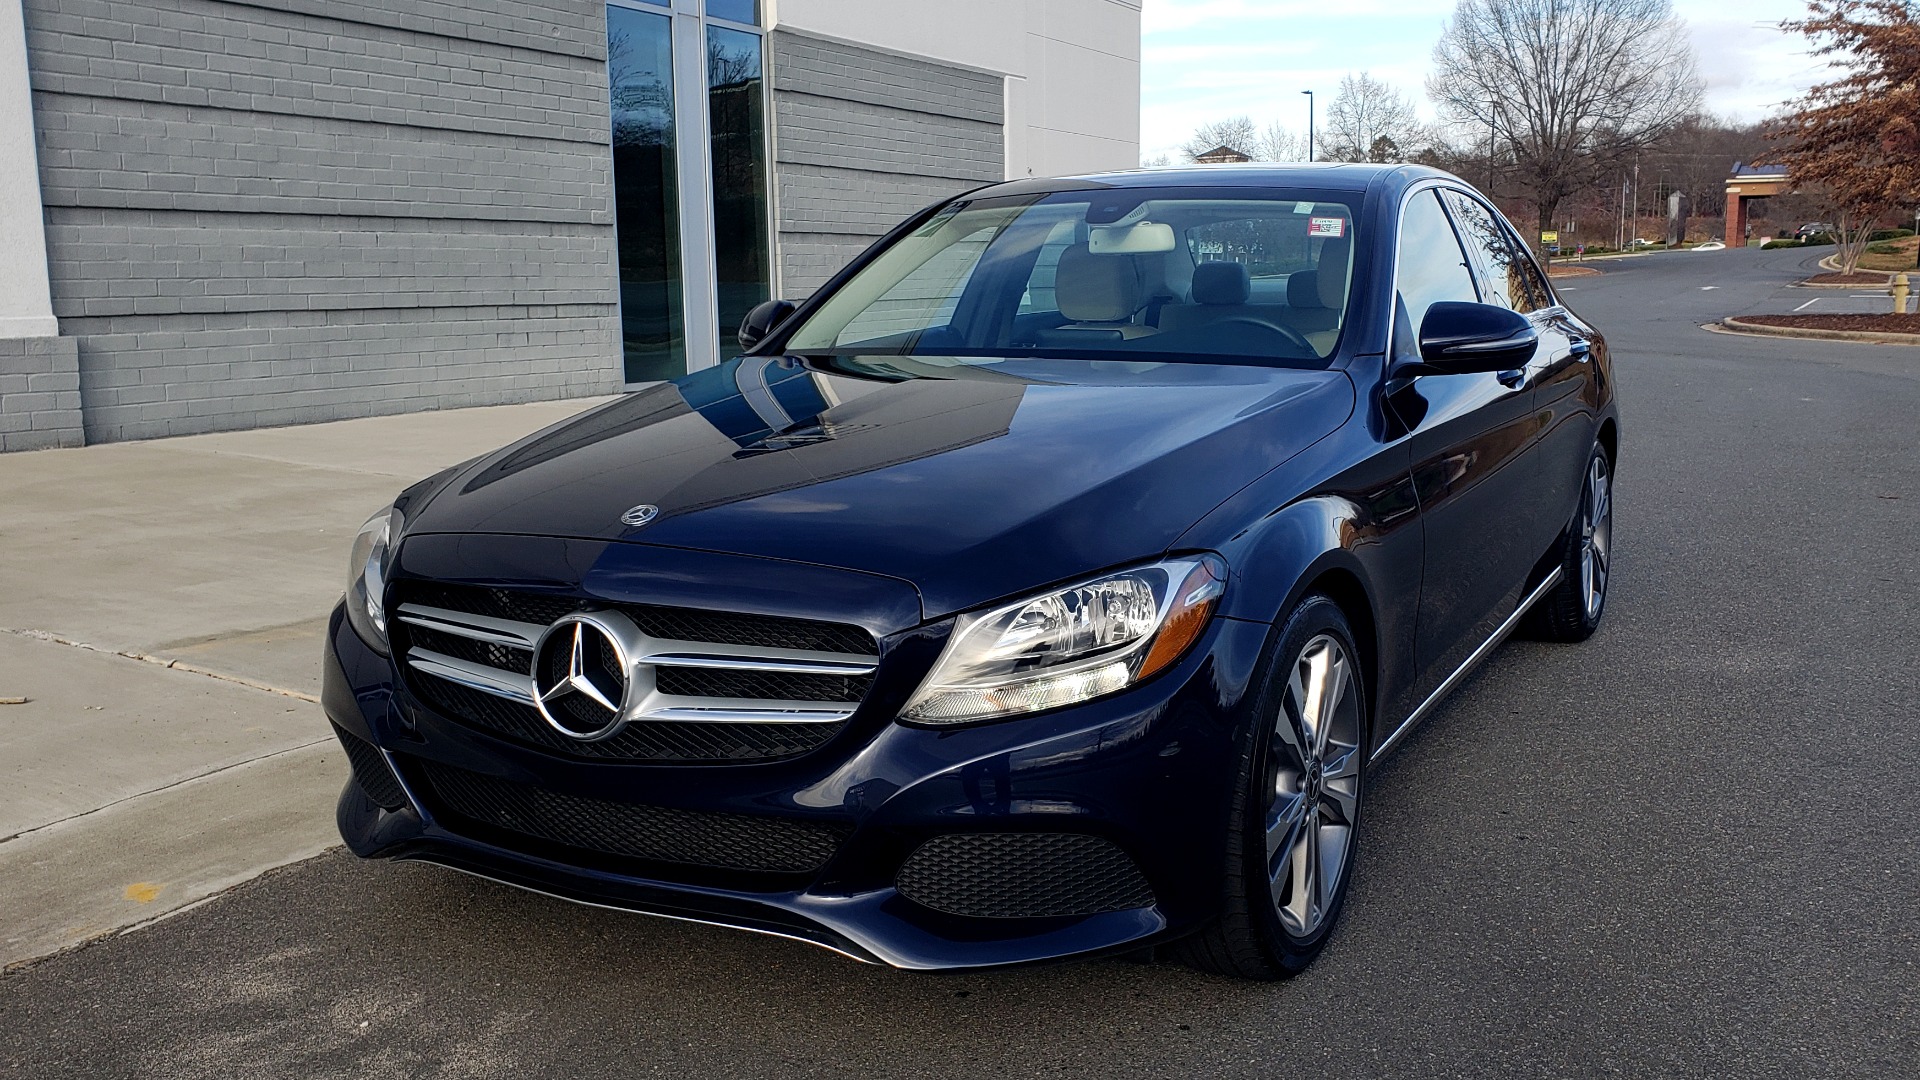 Used 2018 Mercedes-Benz C-CLASS C 300 PREMIUM / SUNROOF / APPLE CARPLAY / REARVIEW for sale Sold at Formula Imports in Charlotte NC 28227 1